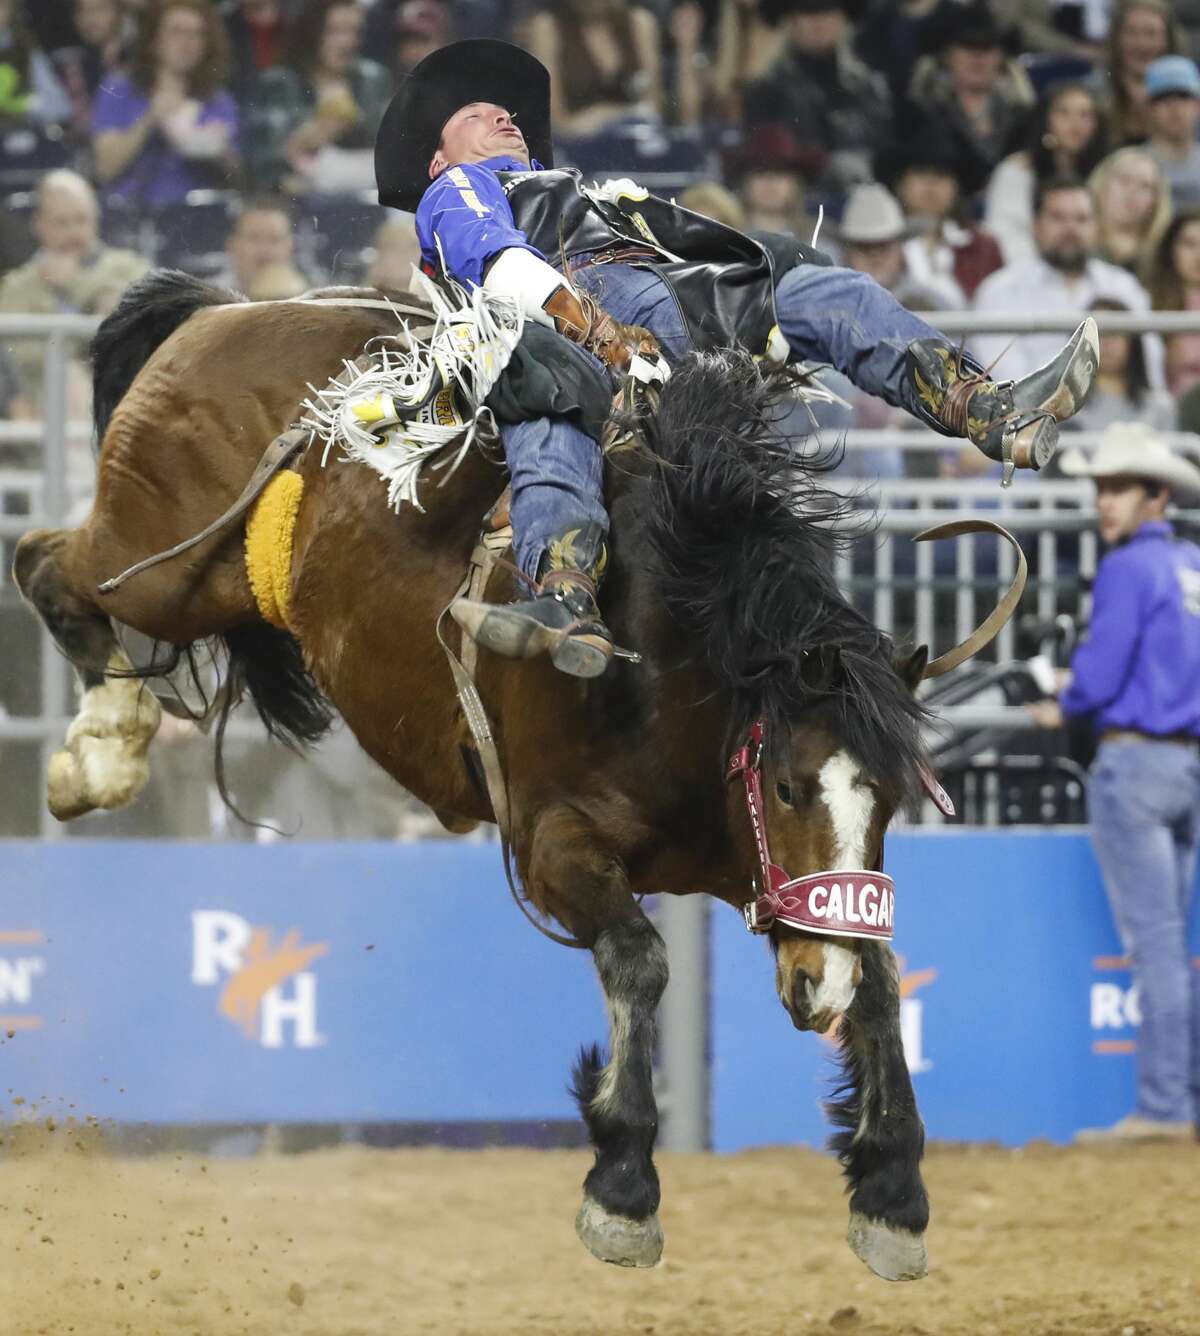 Jake Vold rides Welcome Delivery to a 90 point ride in the bareback riding competition during RodeoHouston Wild Card round at NRG Stadium on Friday, March 15, 2019, in Houston.